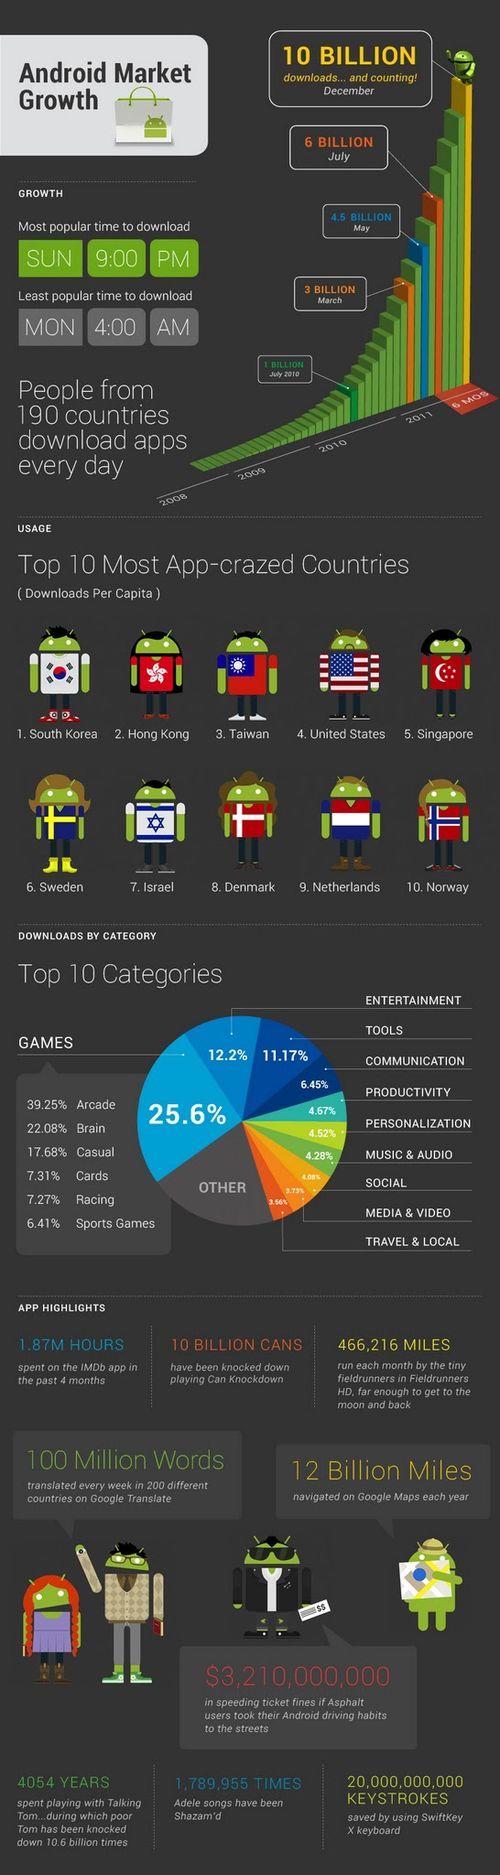 Final-android-market-infographic-1